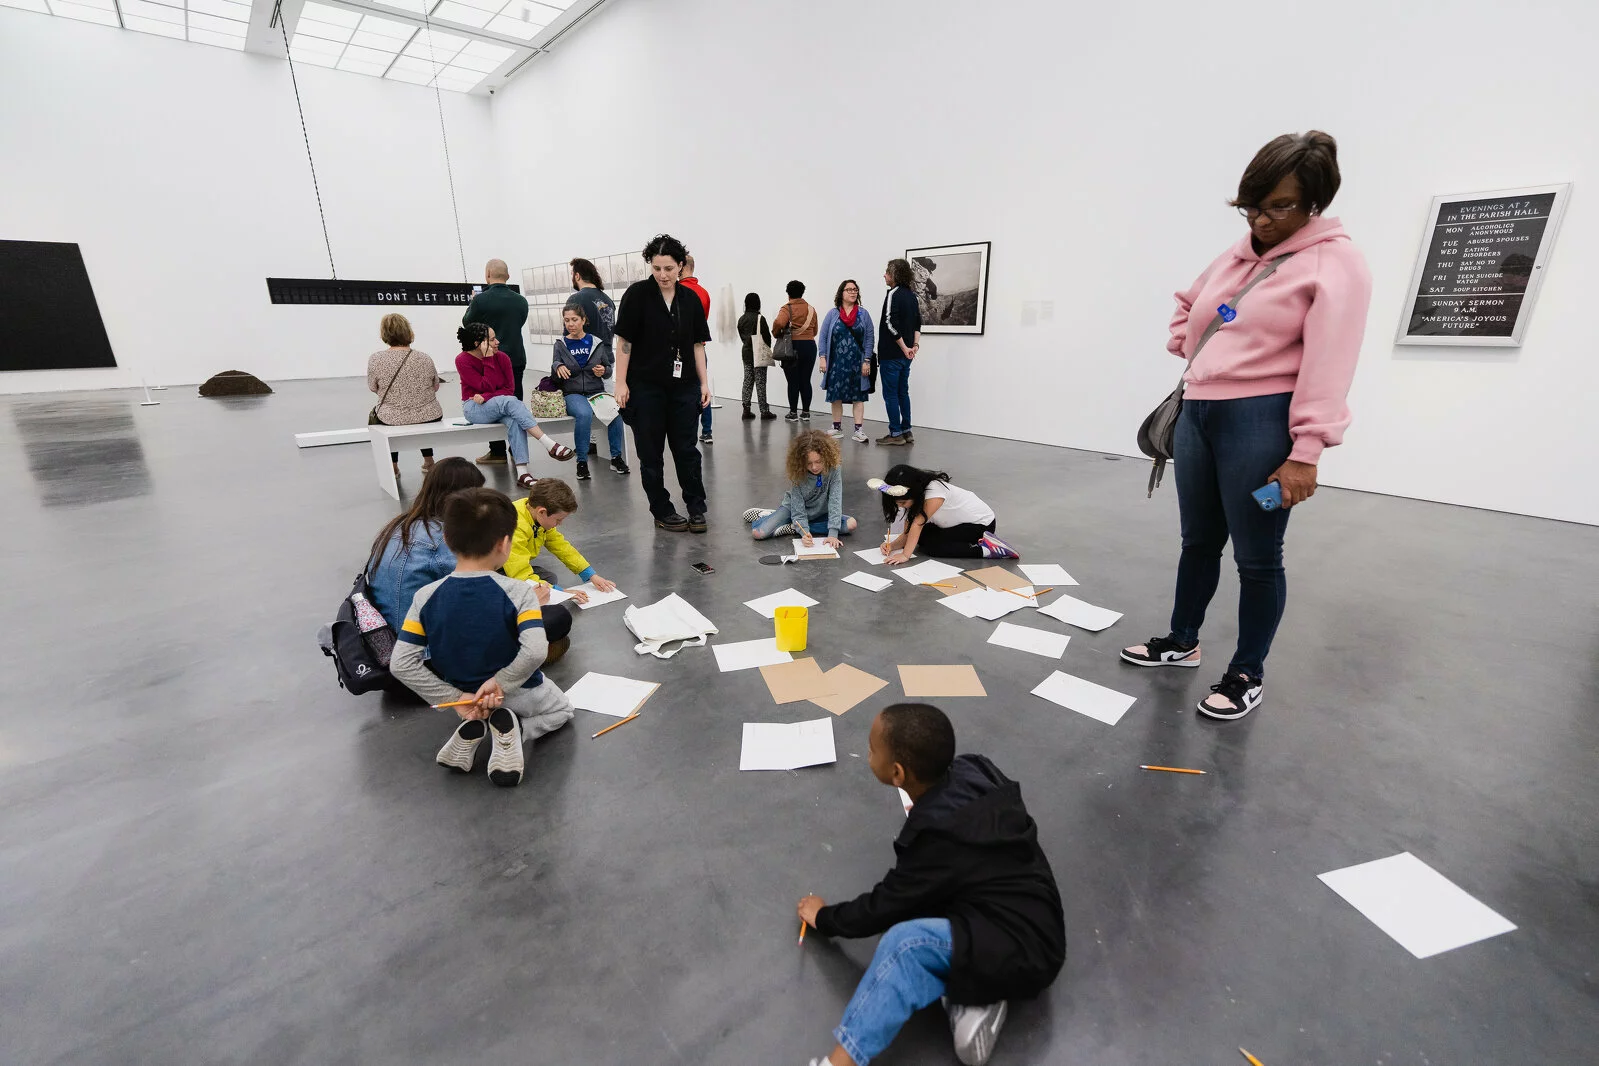 A group of kids peruse pages of paper scattered across a gallery floor as adults watch on.